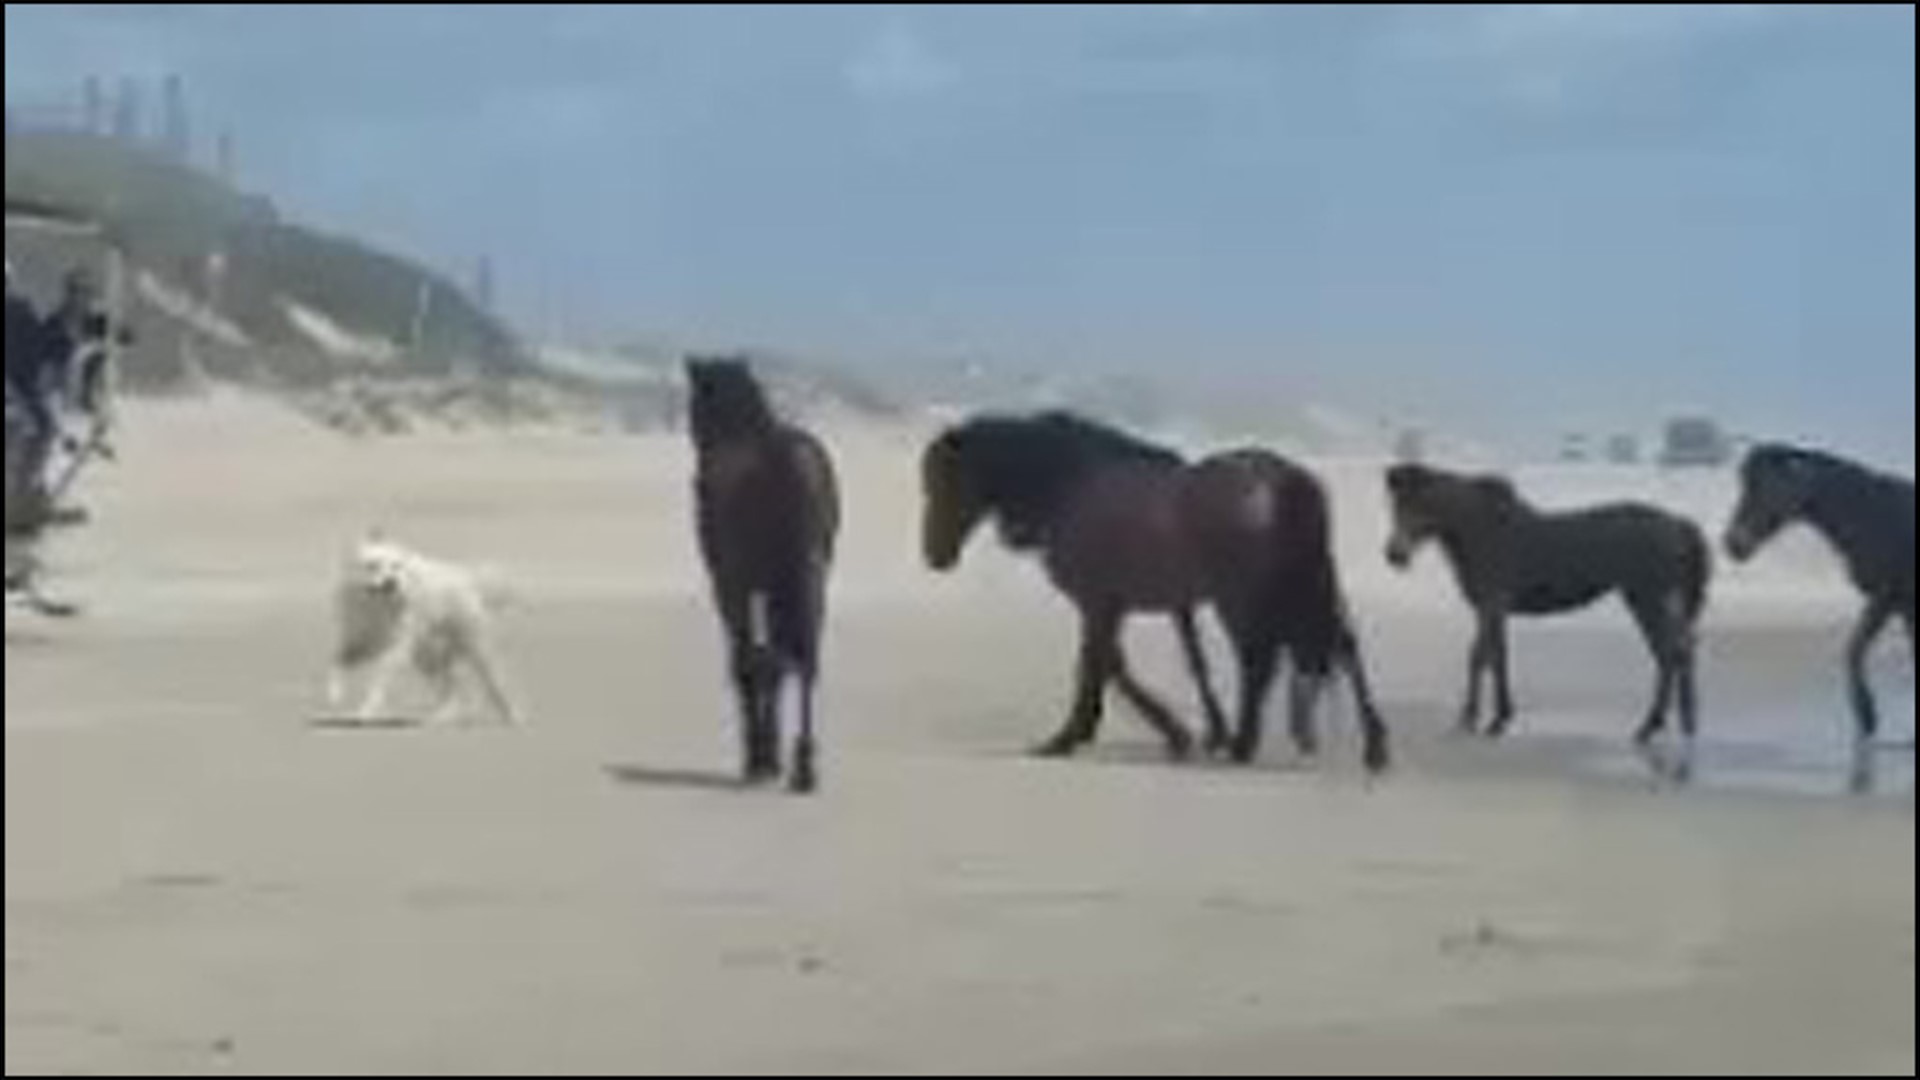 According to the Corolla Wild Horse Fund, this isn't the first time an off-leash dog has attacked the horses. One dog even bit a horse.